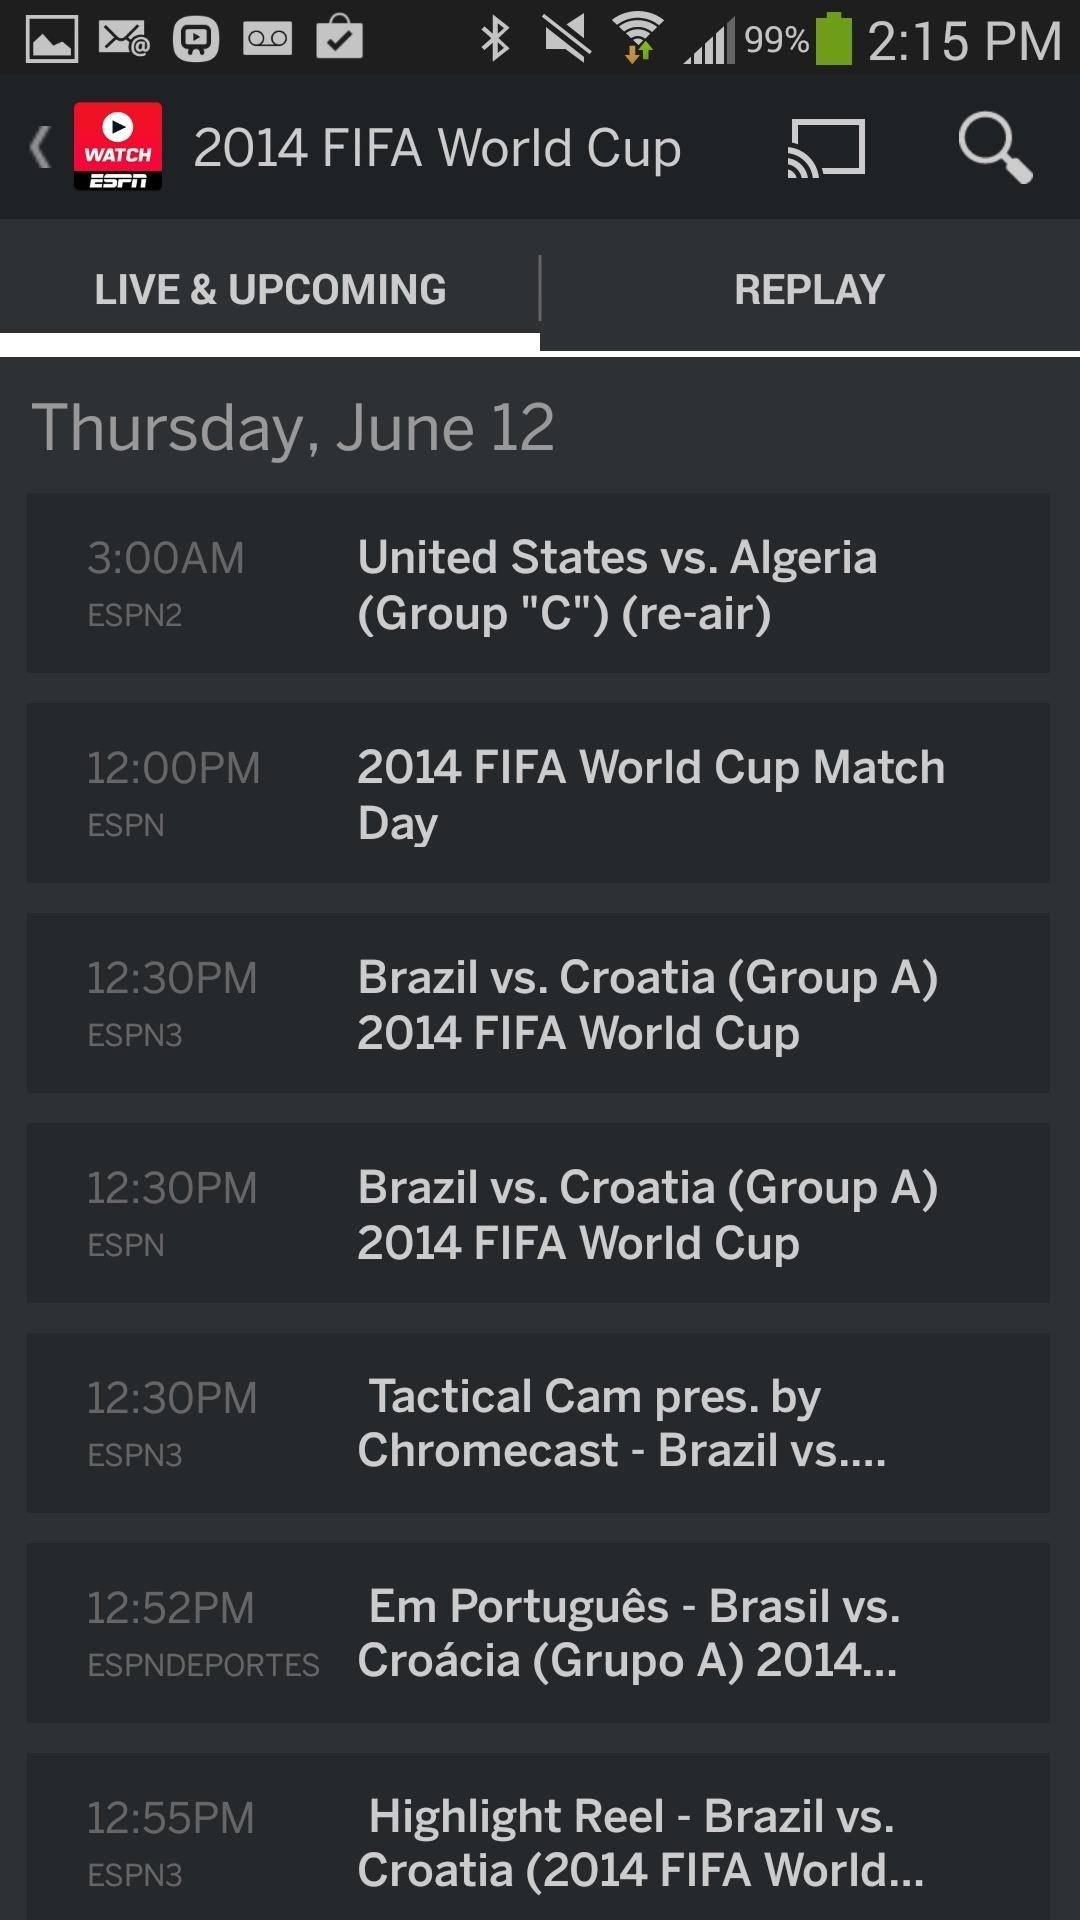 How to Watch the 2014 World Cup Online & on Your Phone—Every Match Streamed Live